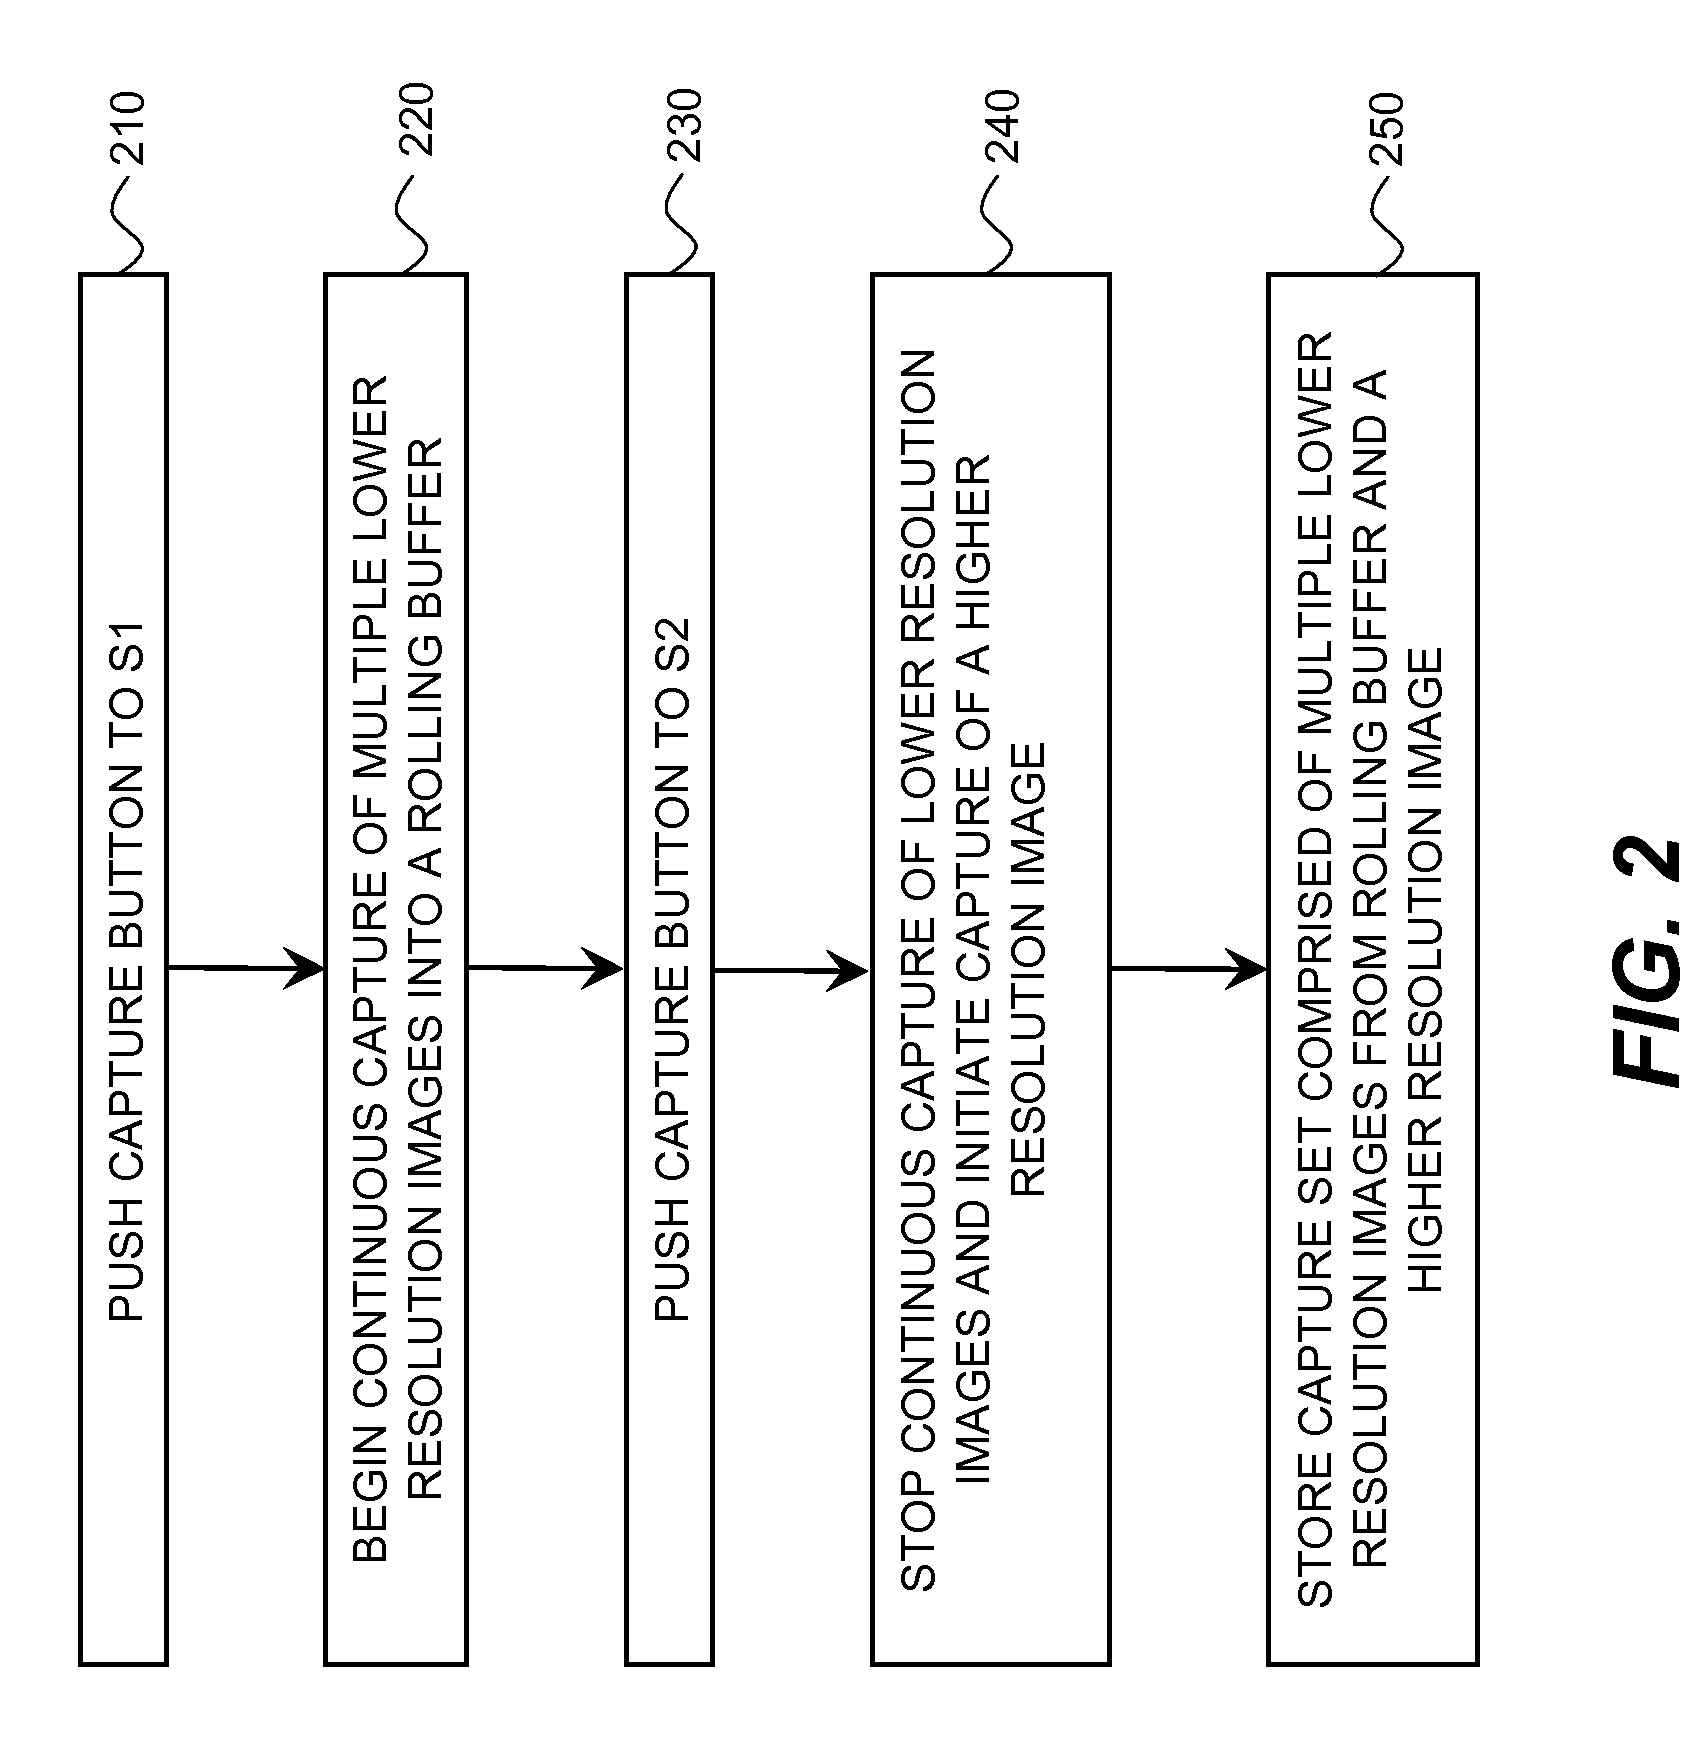 Method for forming an improved image using images with different resolutions